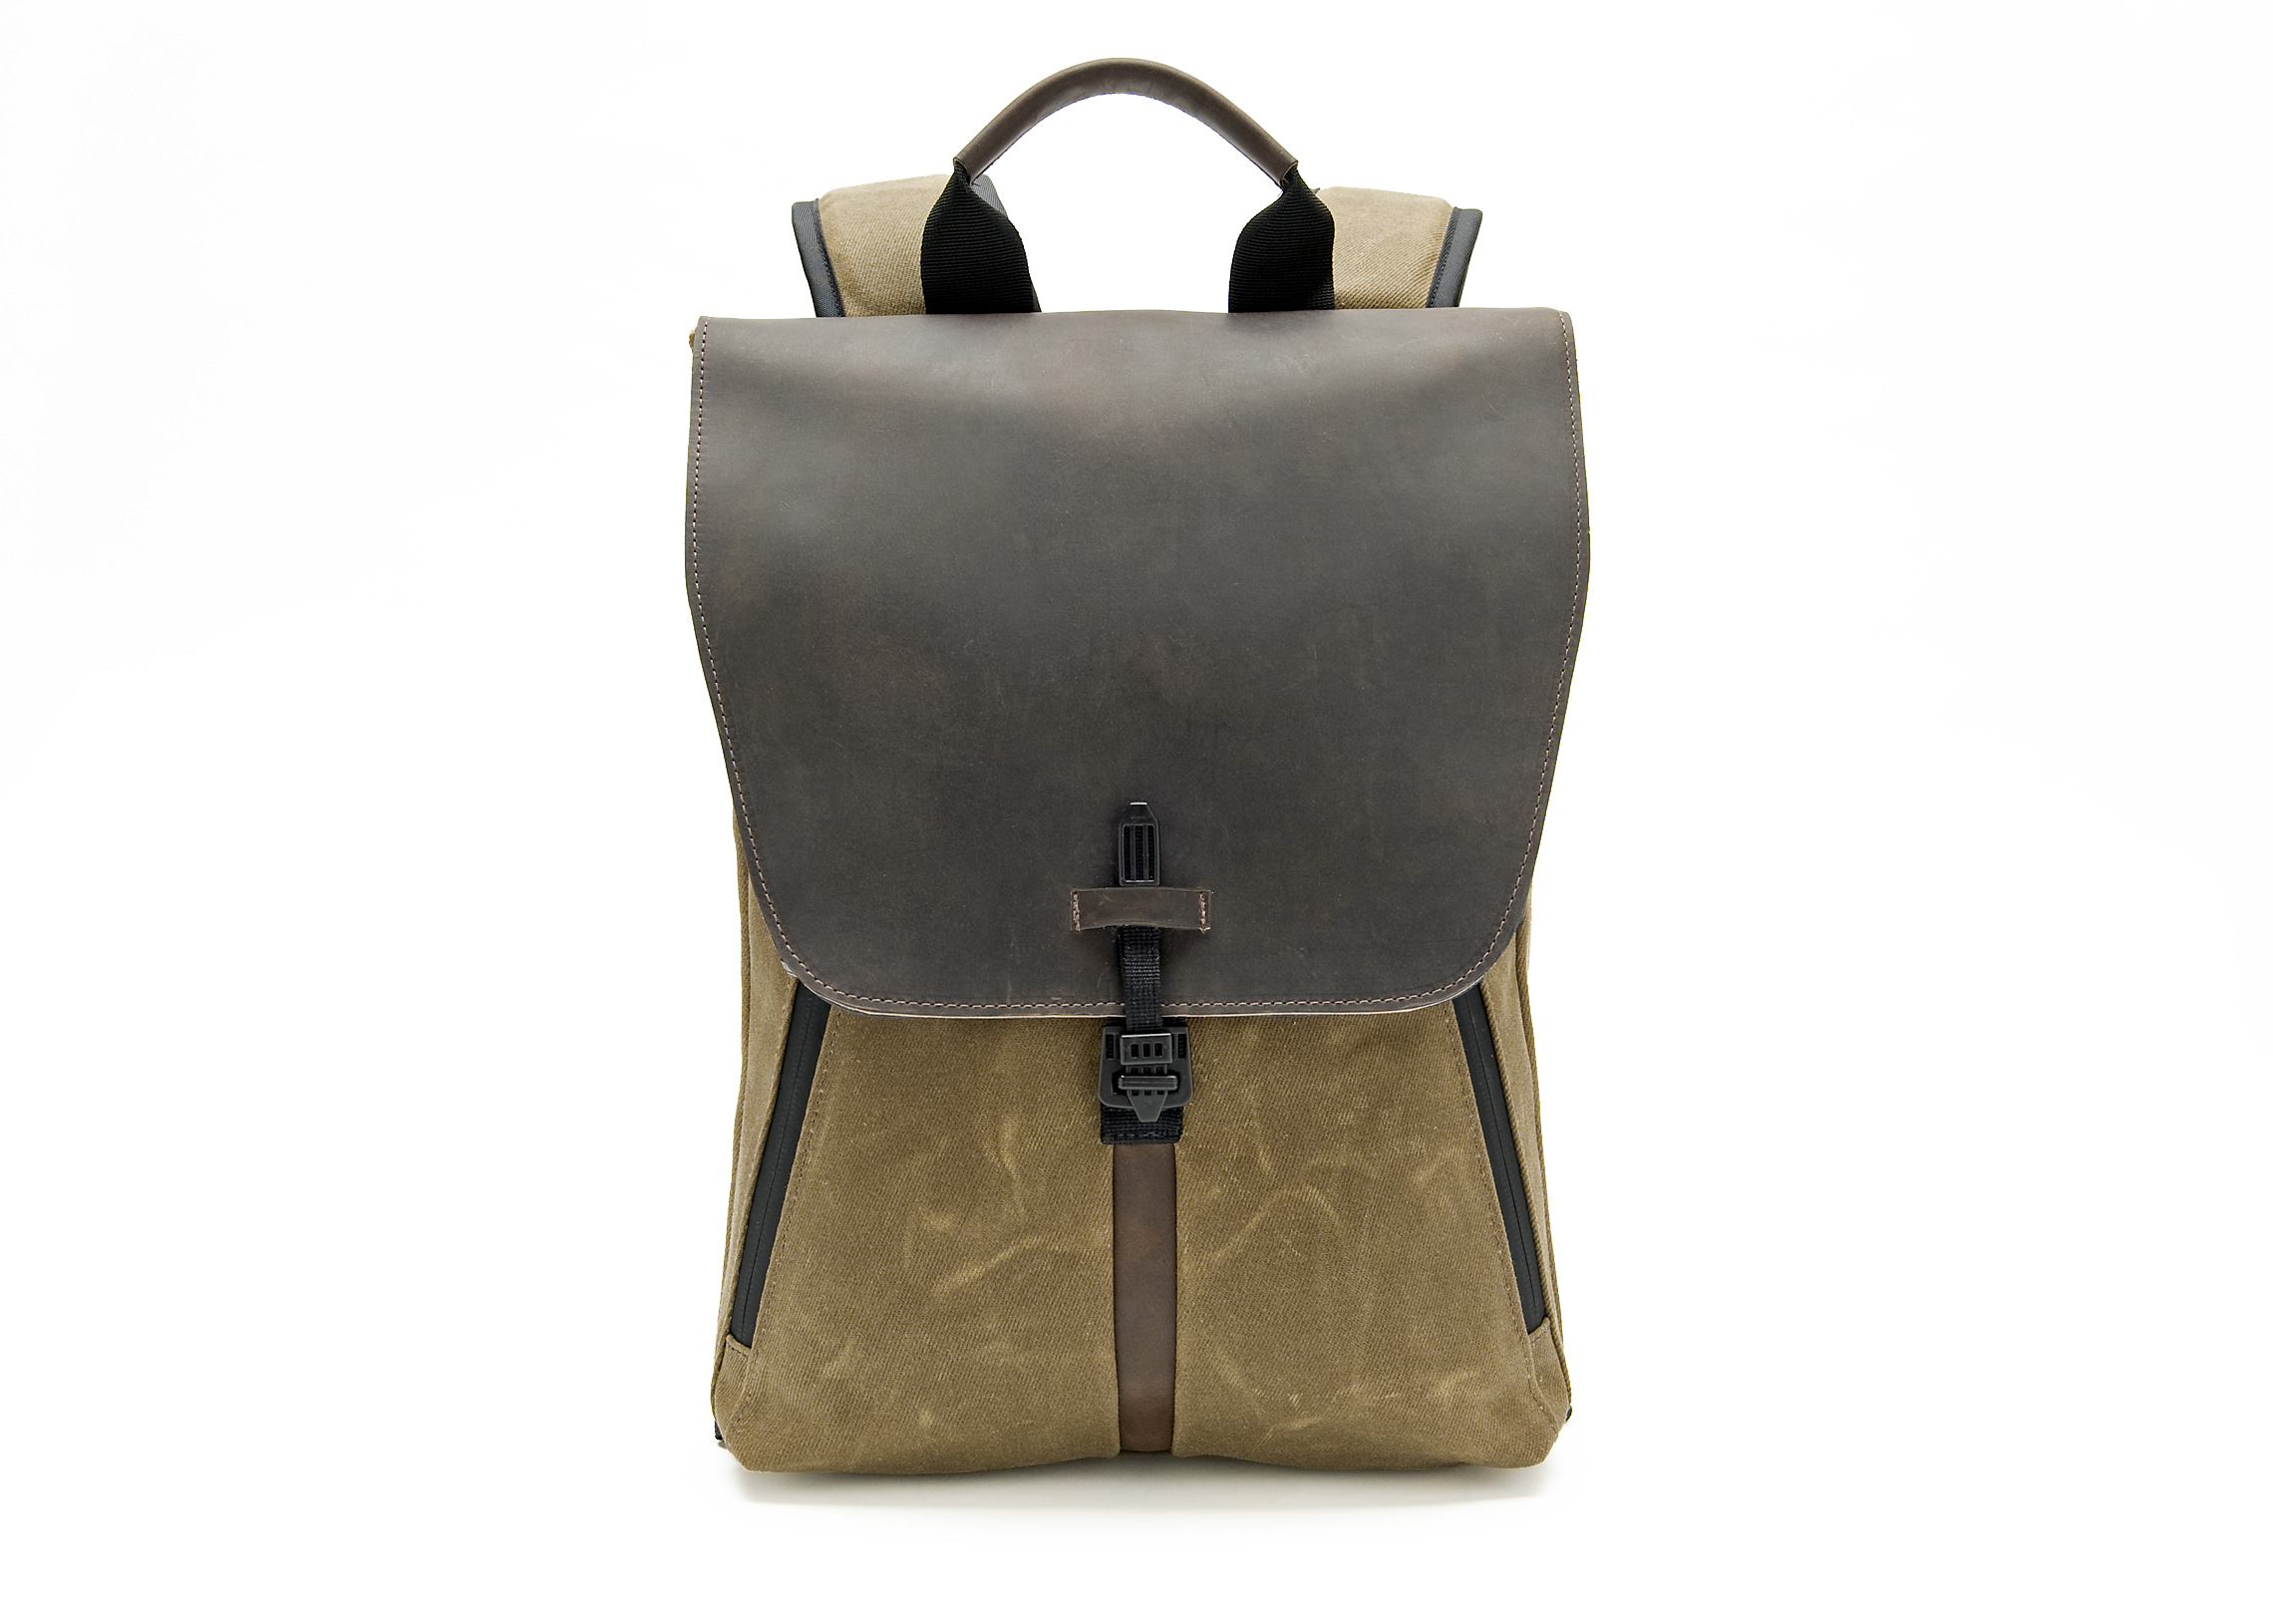 The Staad BackPack